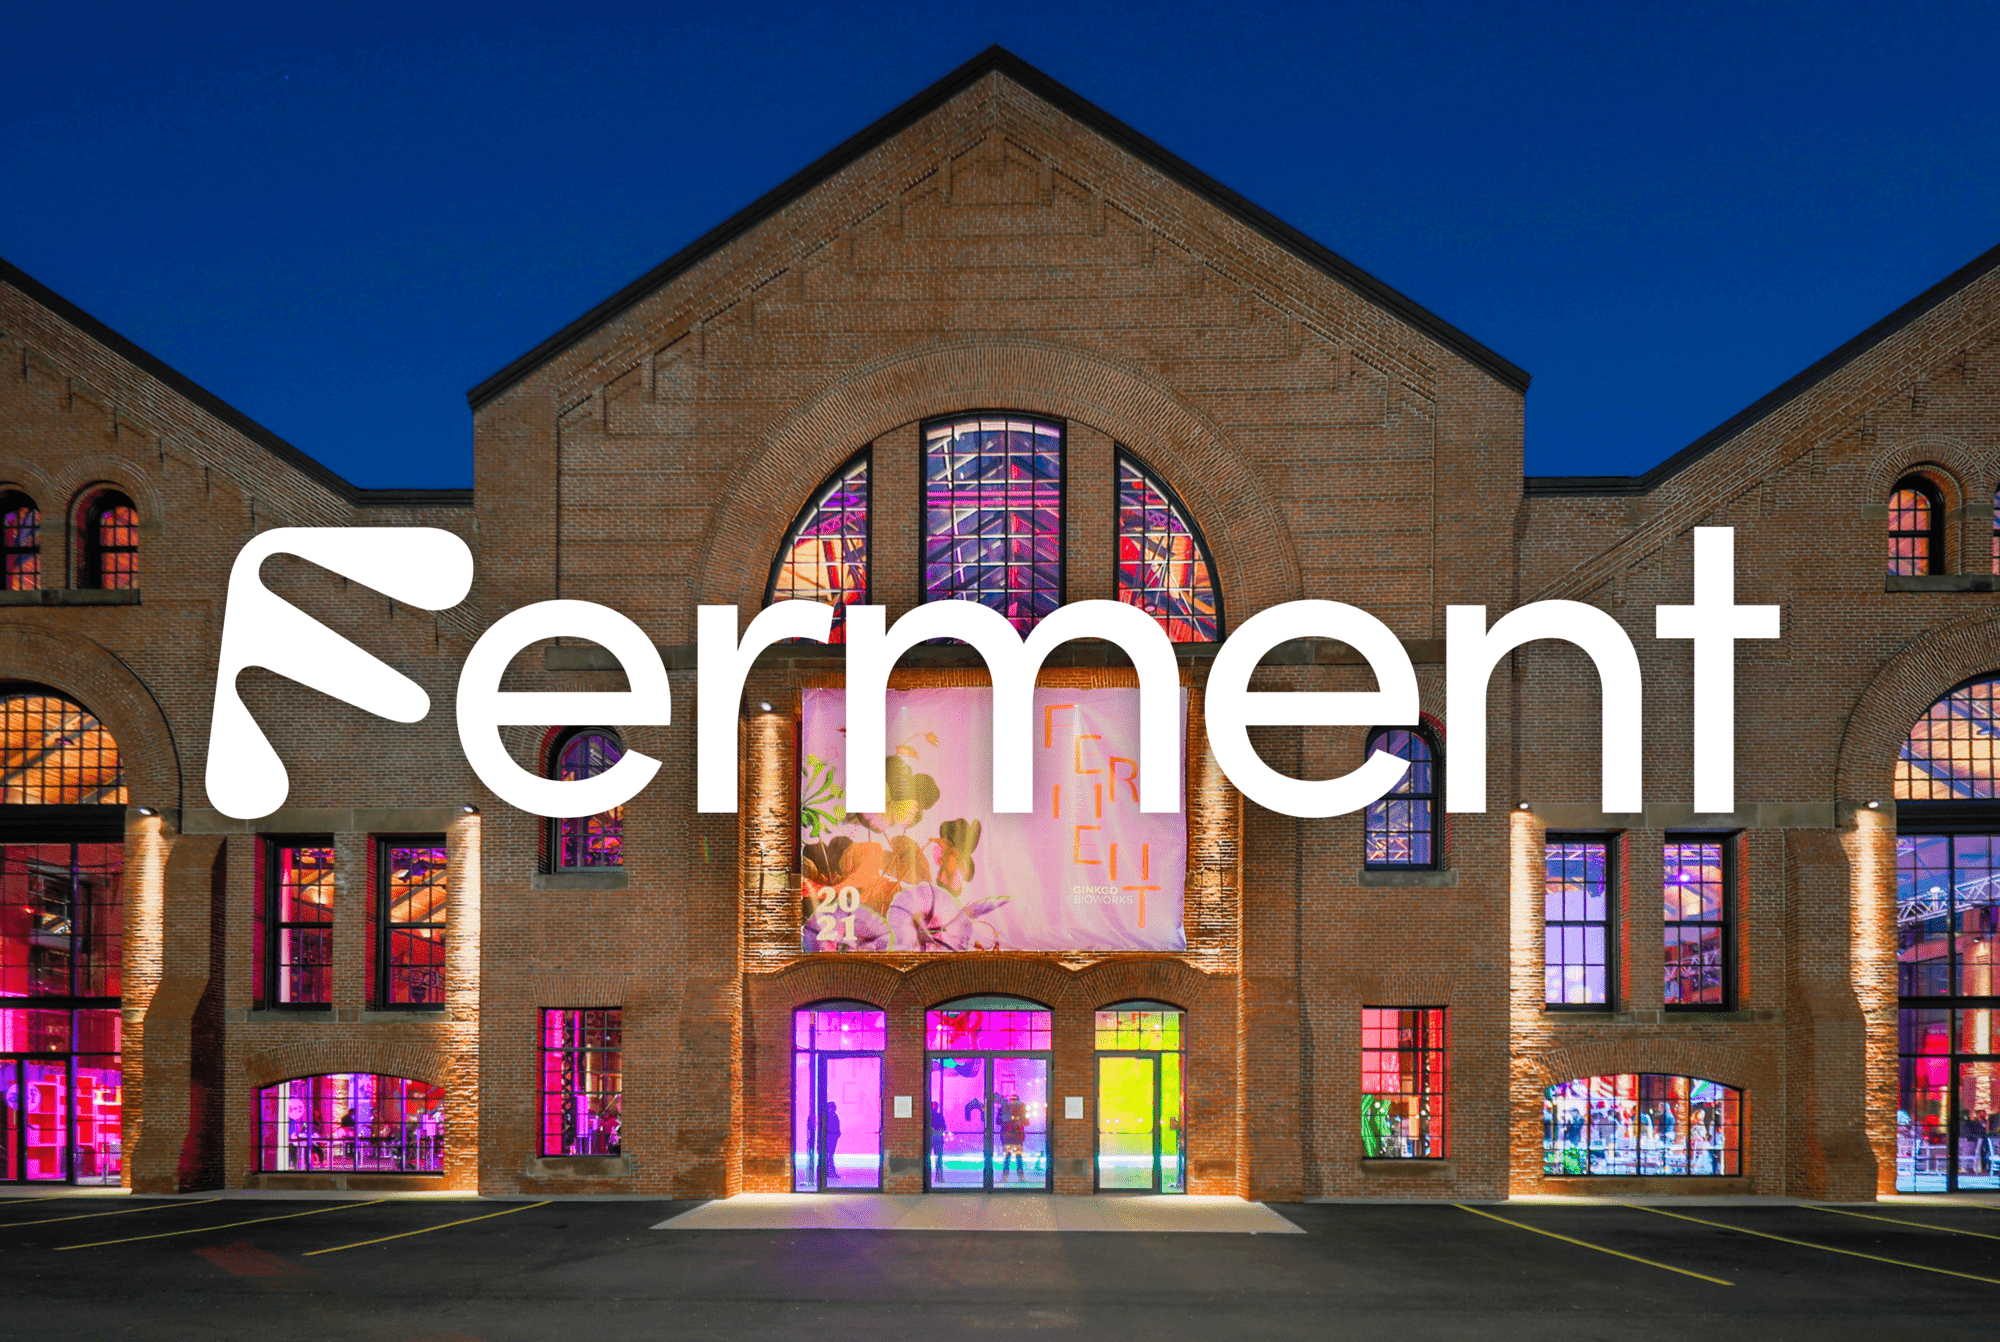 the text Ginkgo Ferment overlaid on Boston's SoWa Power Station event venue